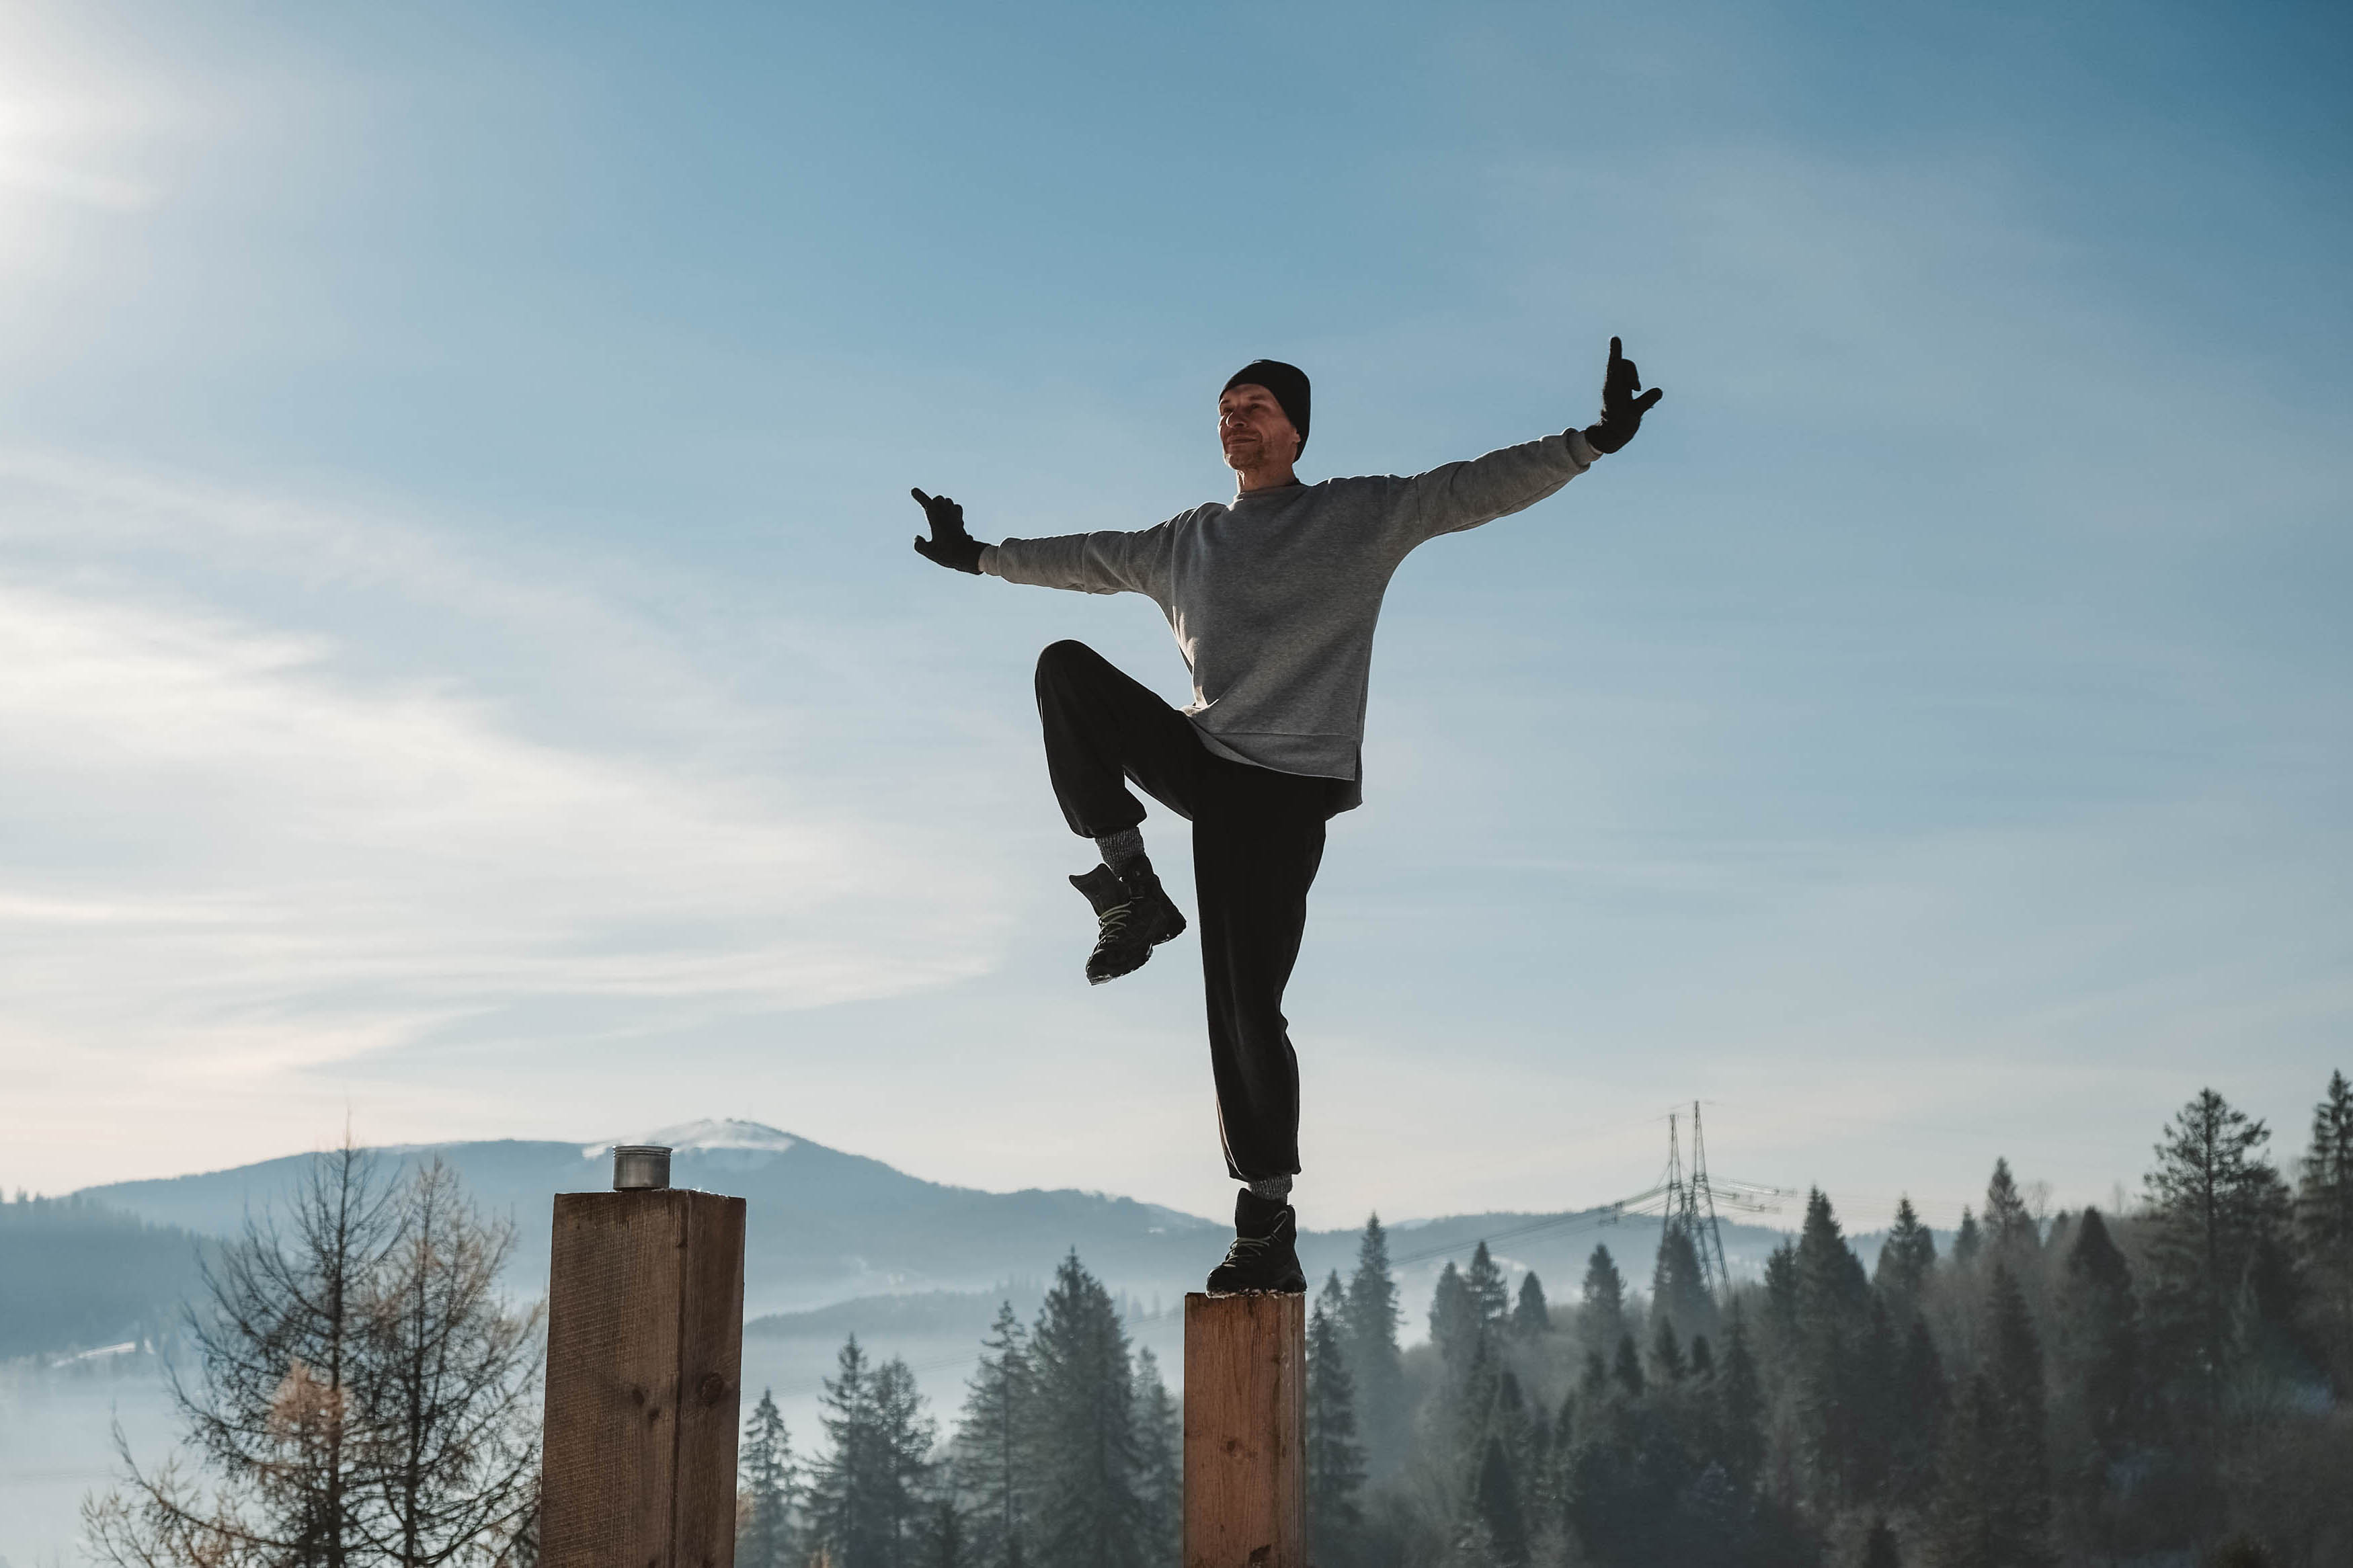 Athletic man doing a pose at the top of a wooden pole, arms extended, wearing a beanie